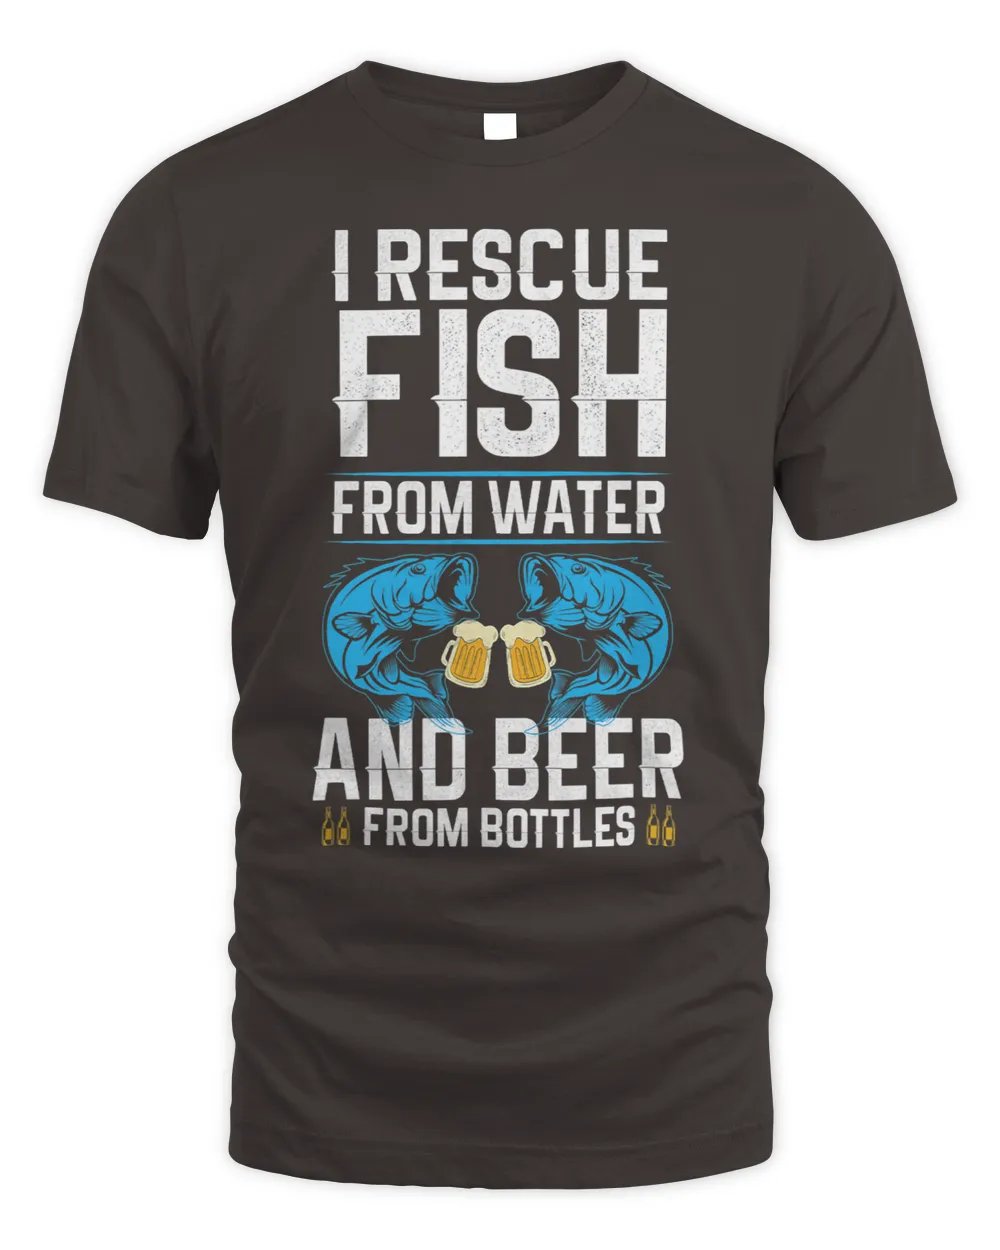 I Rescue Fish From Water And Beer From Bottles Fisherman 29